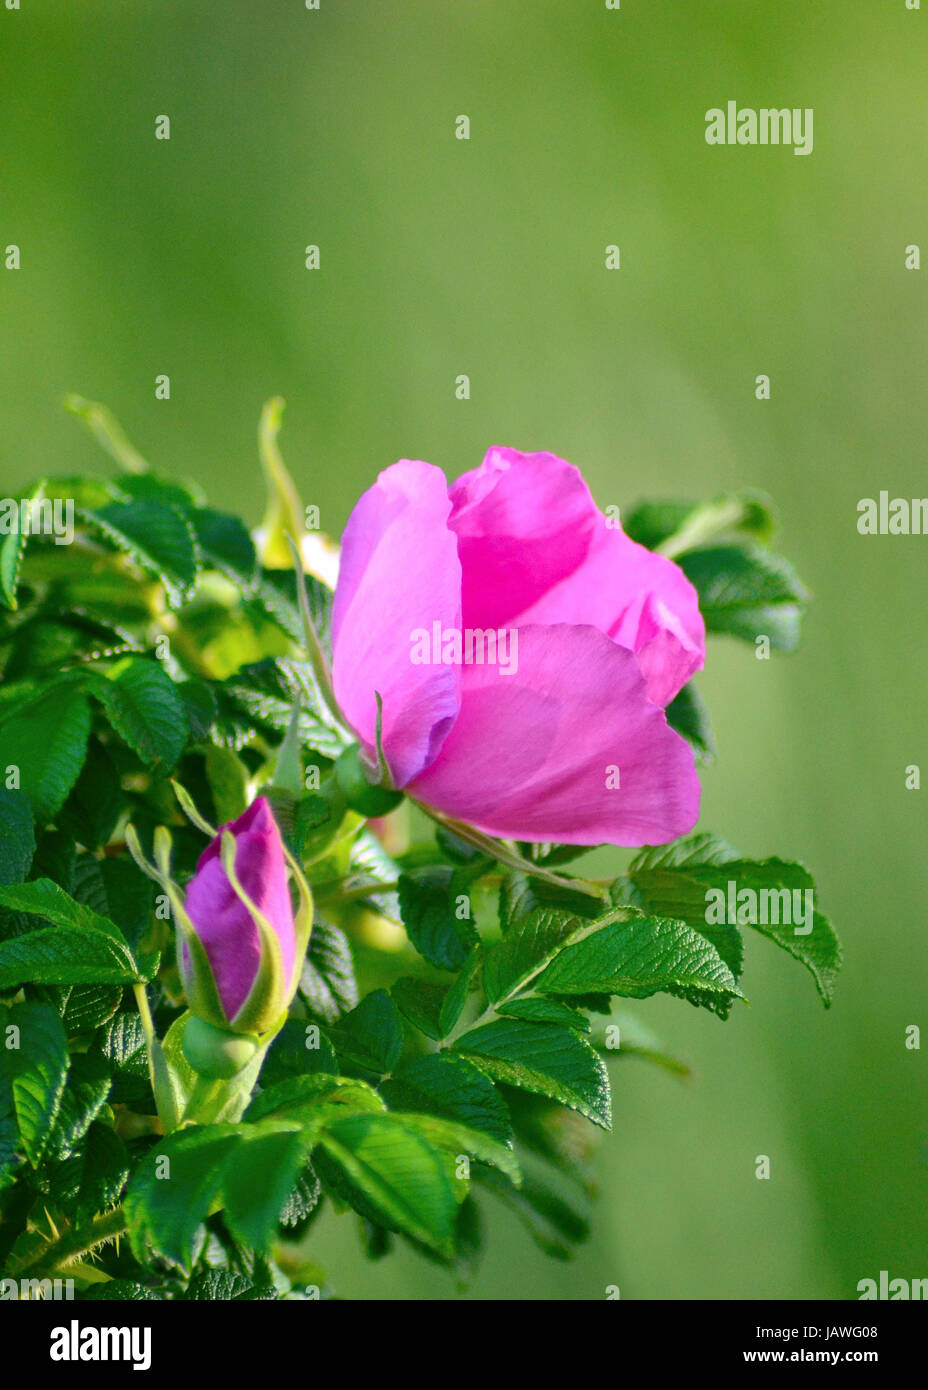 Wild pink rose isolated in a soft morning sunlight, with dense green foliage in soft focus at the background. Stock Photo